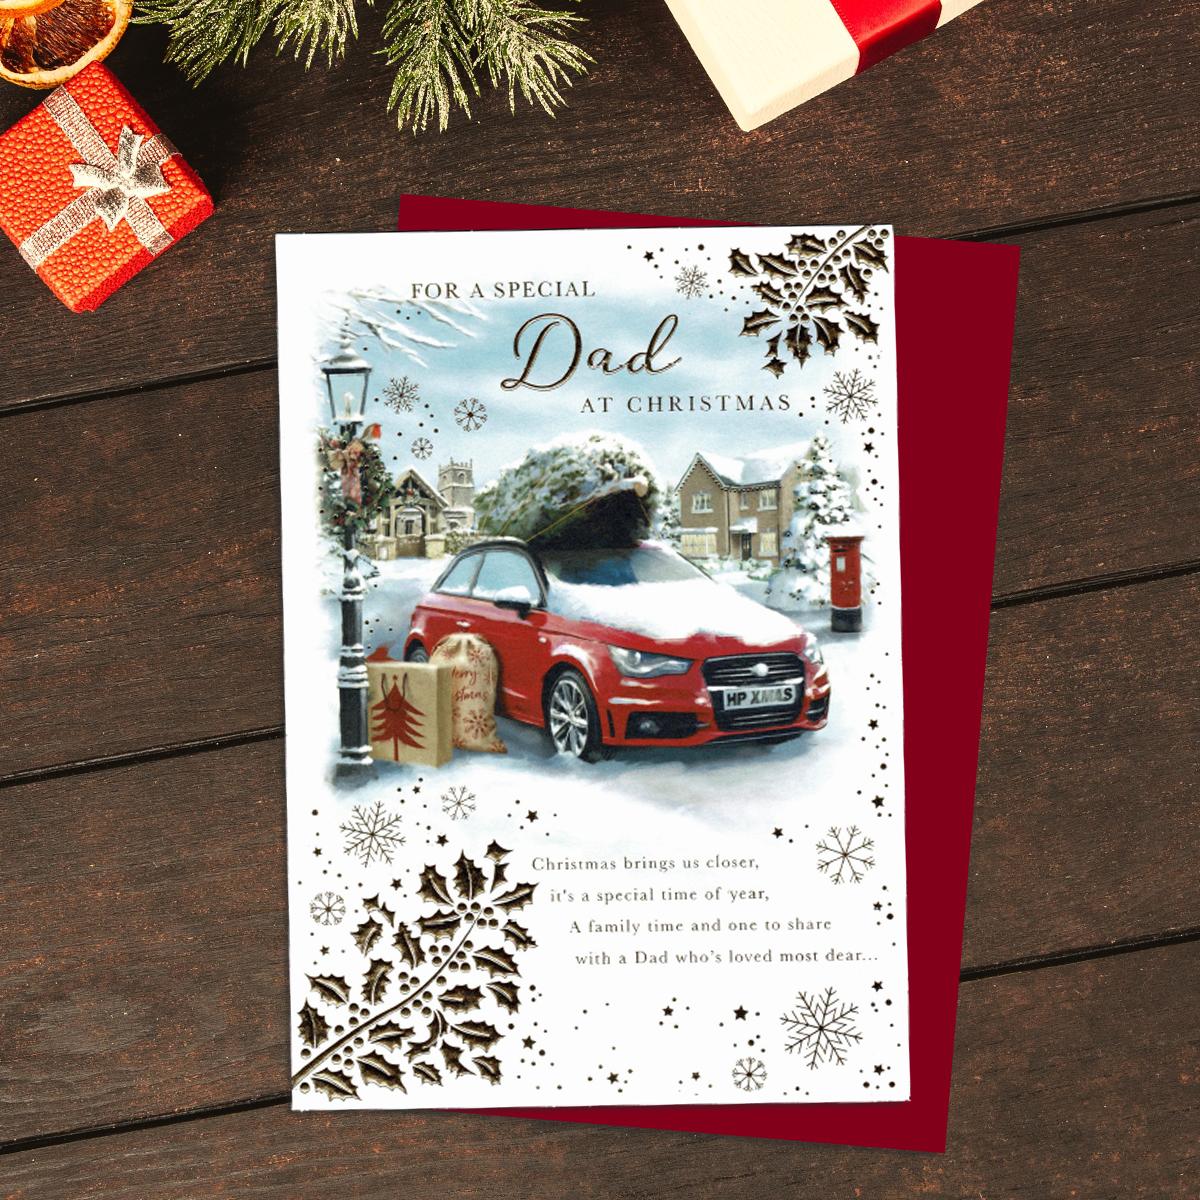 For A Special Dad At Christmas Showing A Red Car On Top Of Which is The Christmas Tree. Finished With Gold Foil Lettering And Complete With A Red Envelope